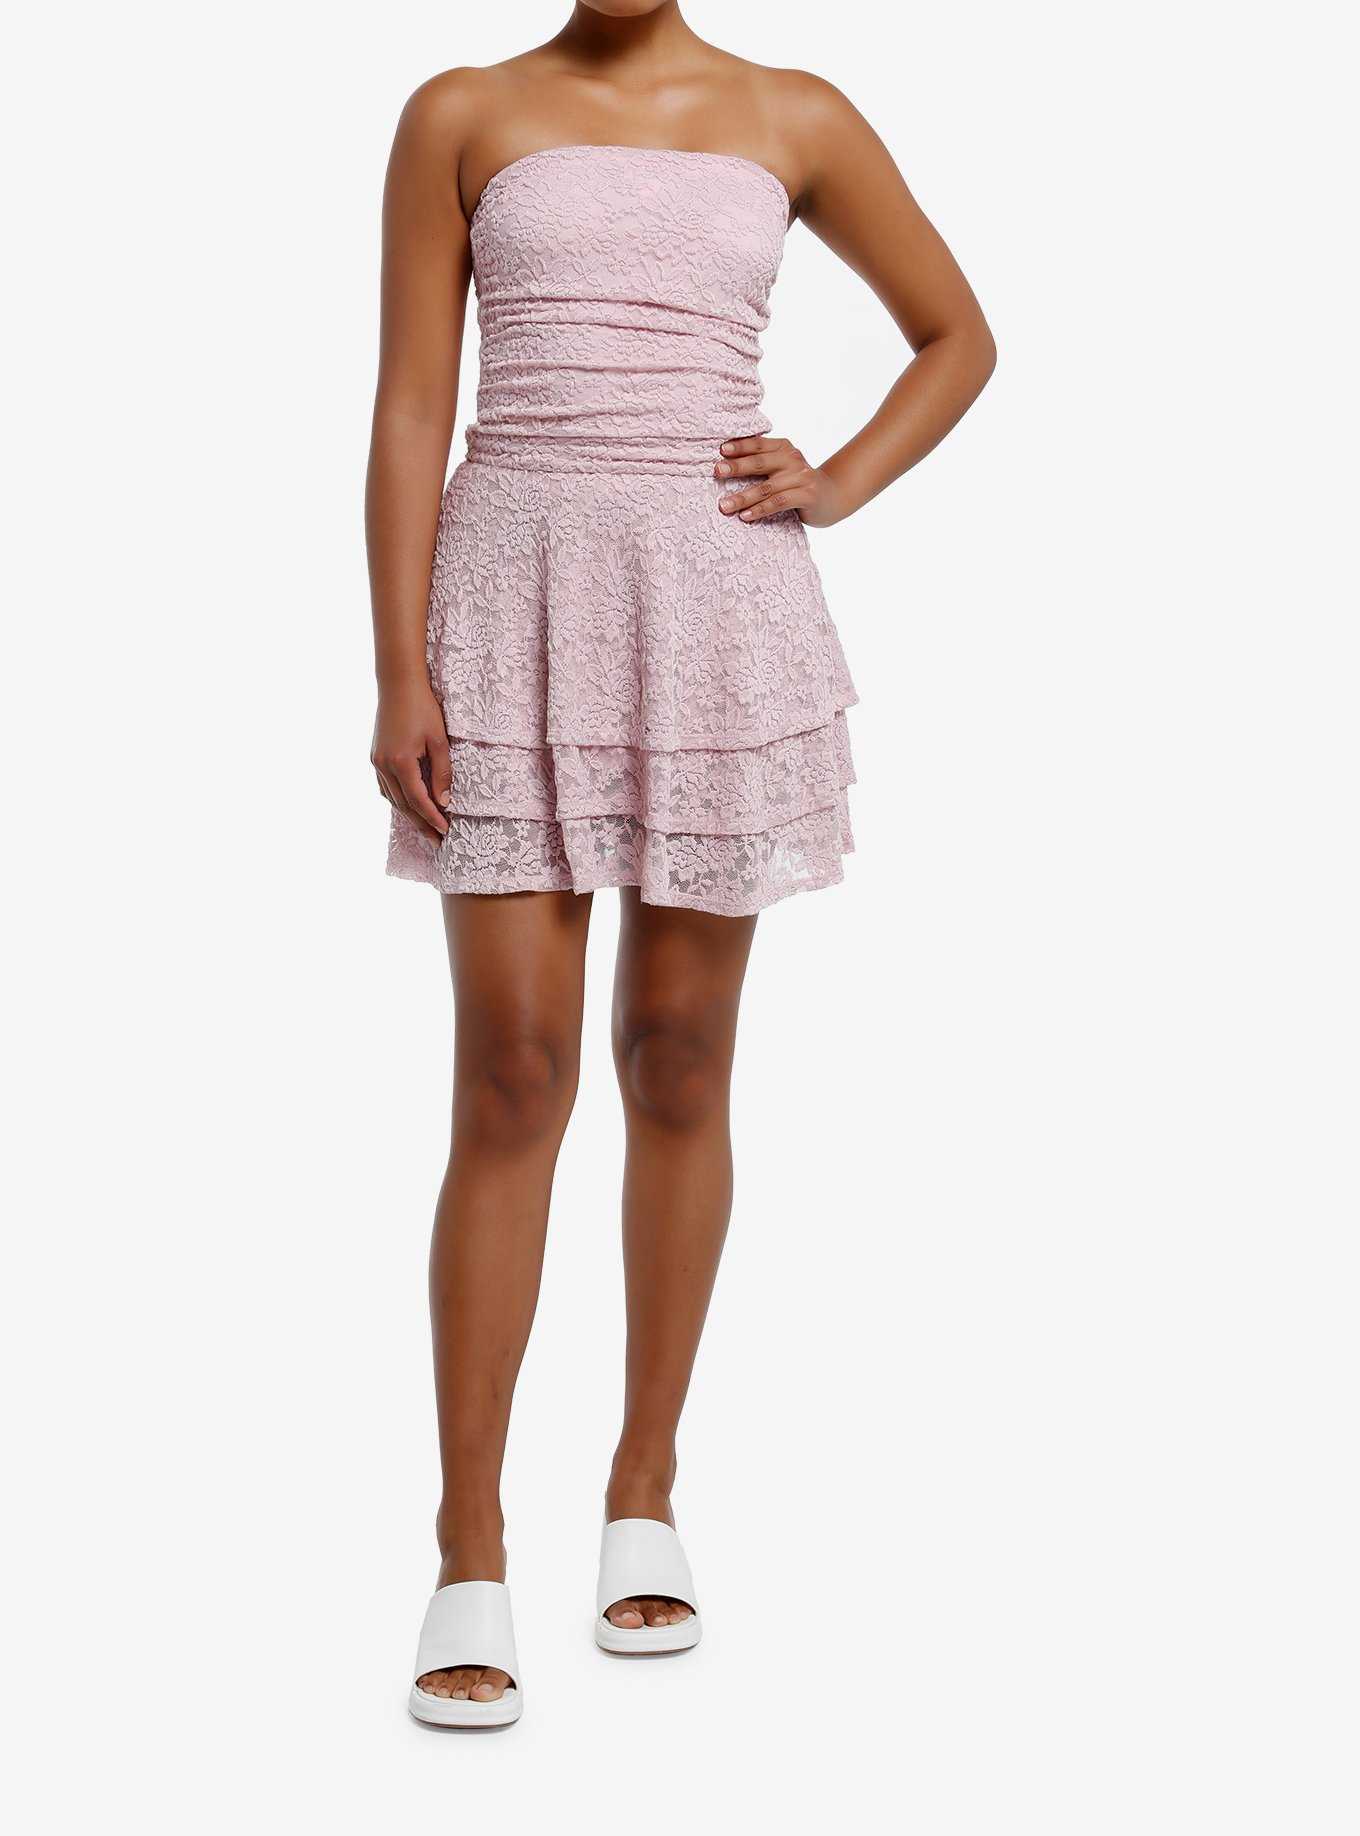 Sweet Society Pink Lace Ruffle Strapless Dress, , hi-res